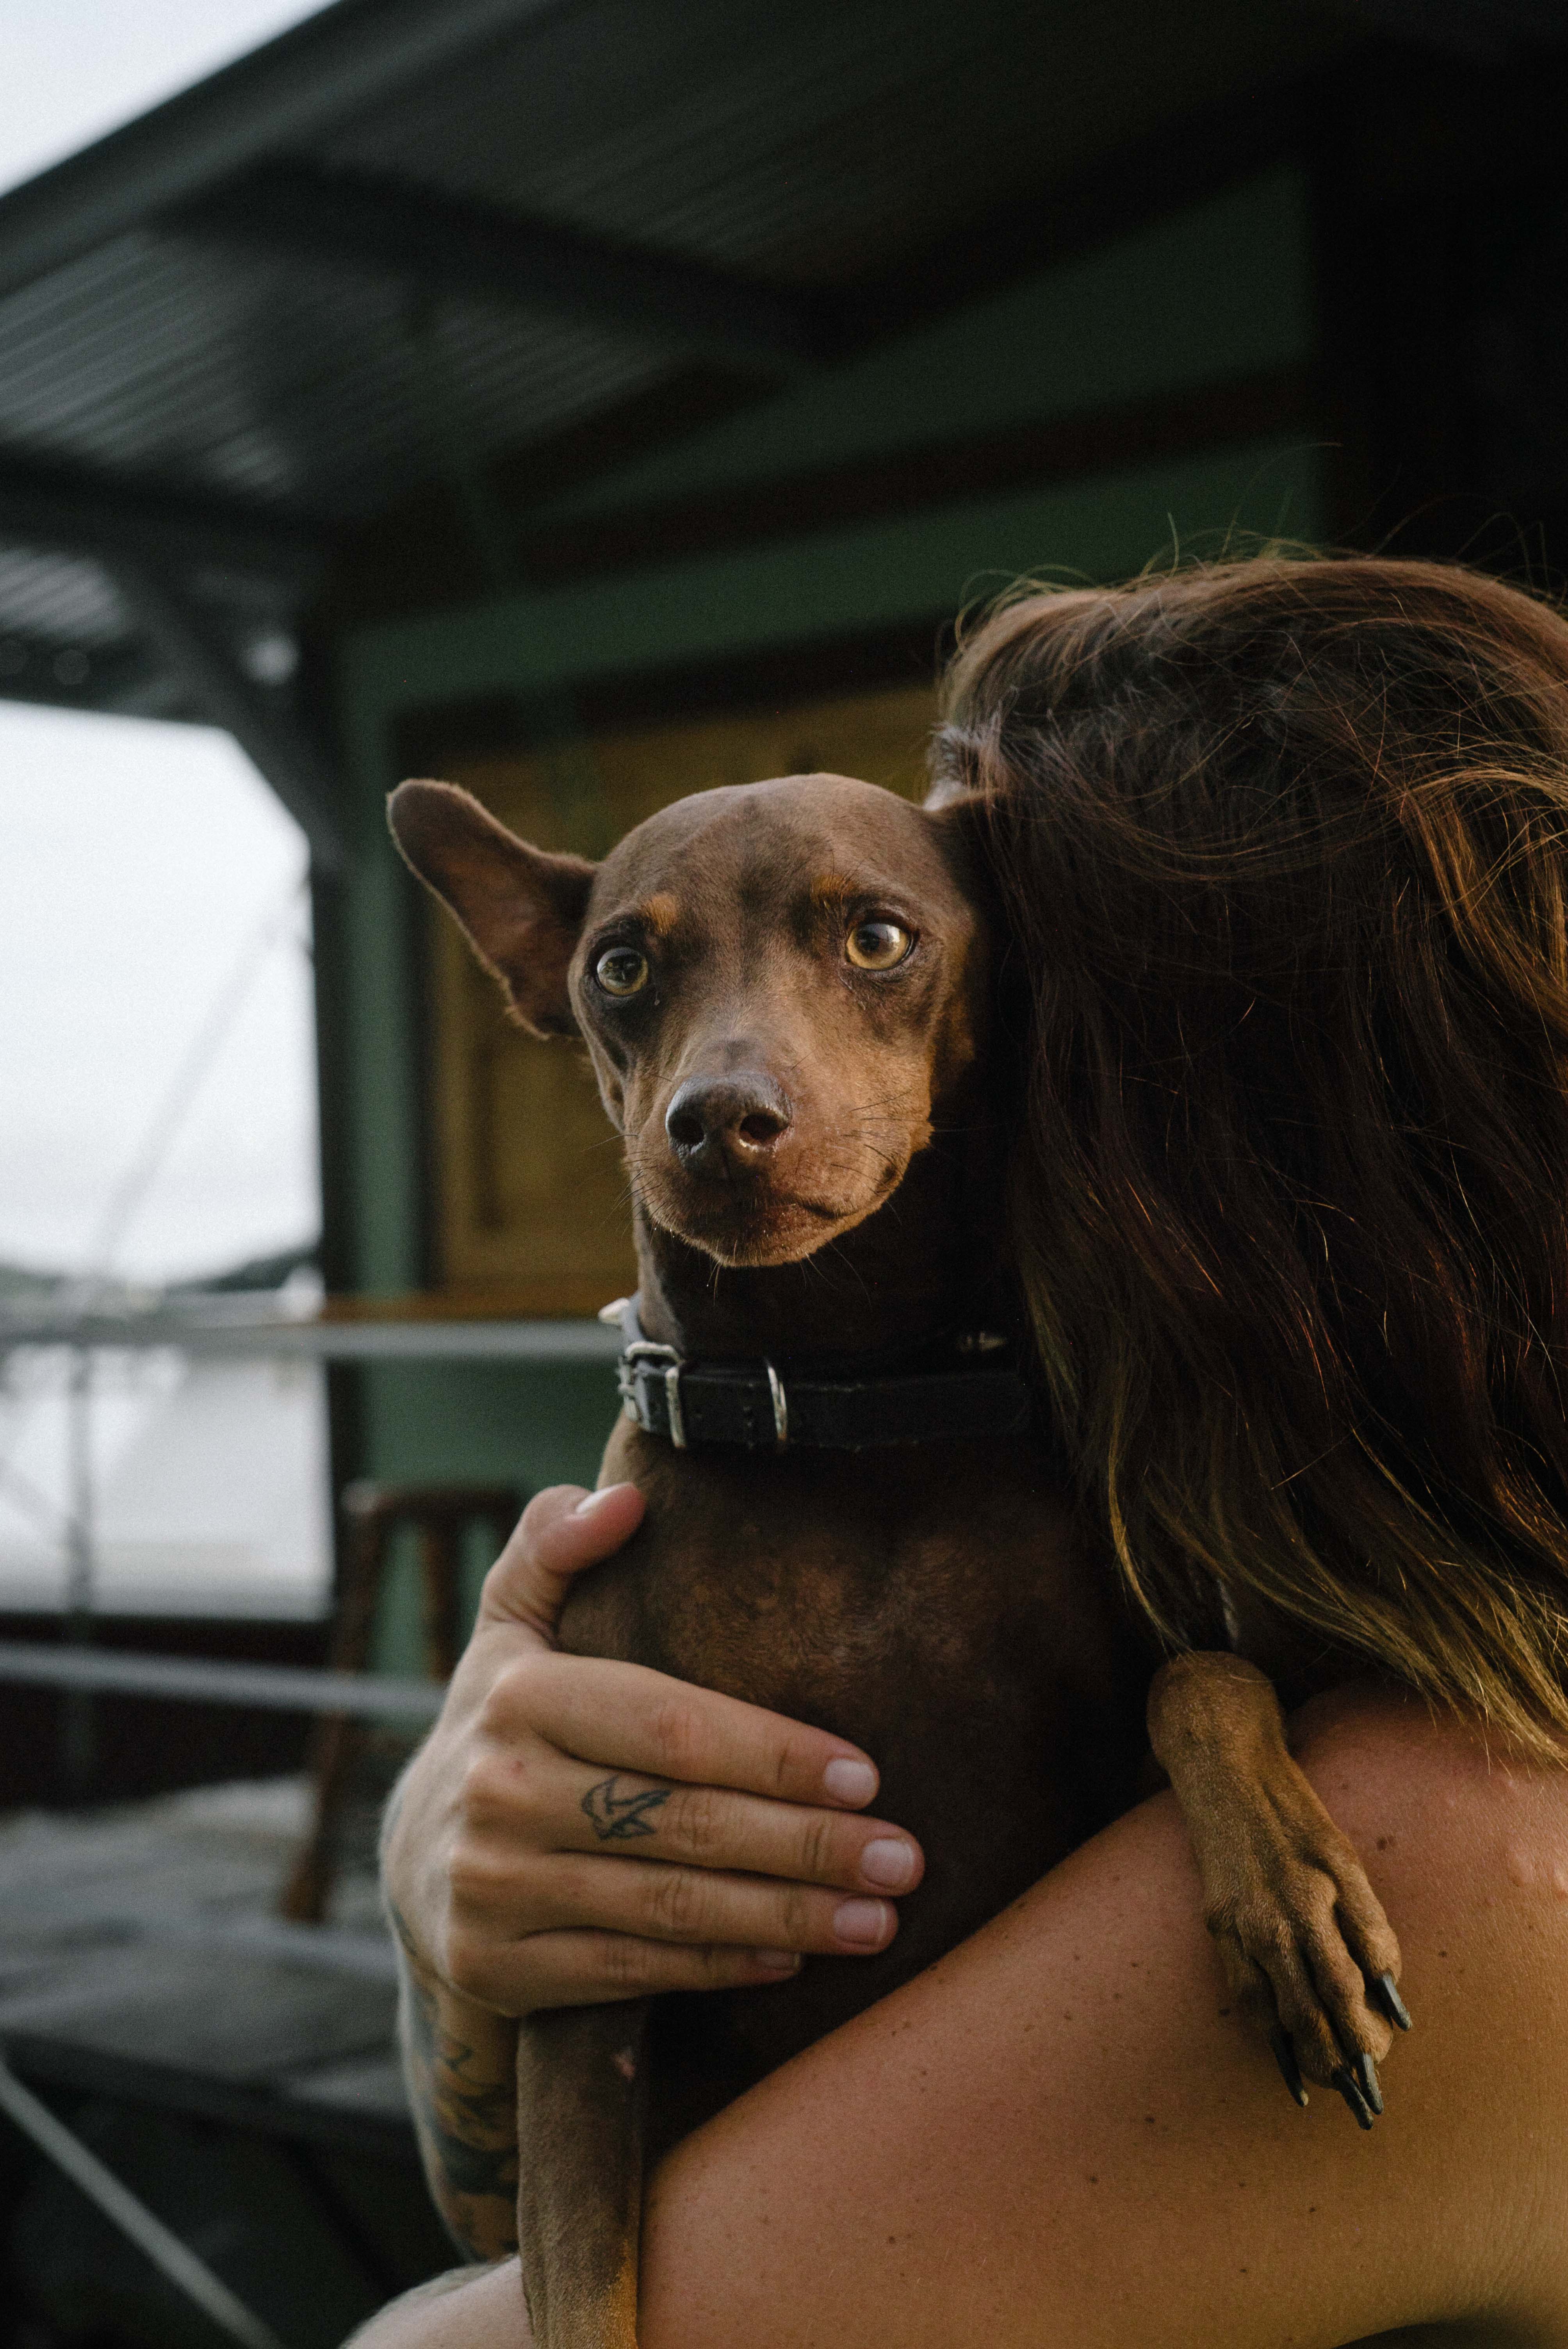 There were several animals wandering around Banana Bay, but people clearly liked this dog the most. They said she once arrived aboard a boat, who could not continue to its destination with him aboard. The passengers convinced Katie, owner of Banana Bay Marina to keep it. She named it “Gypsy."